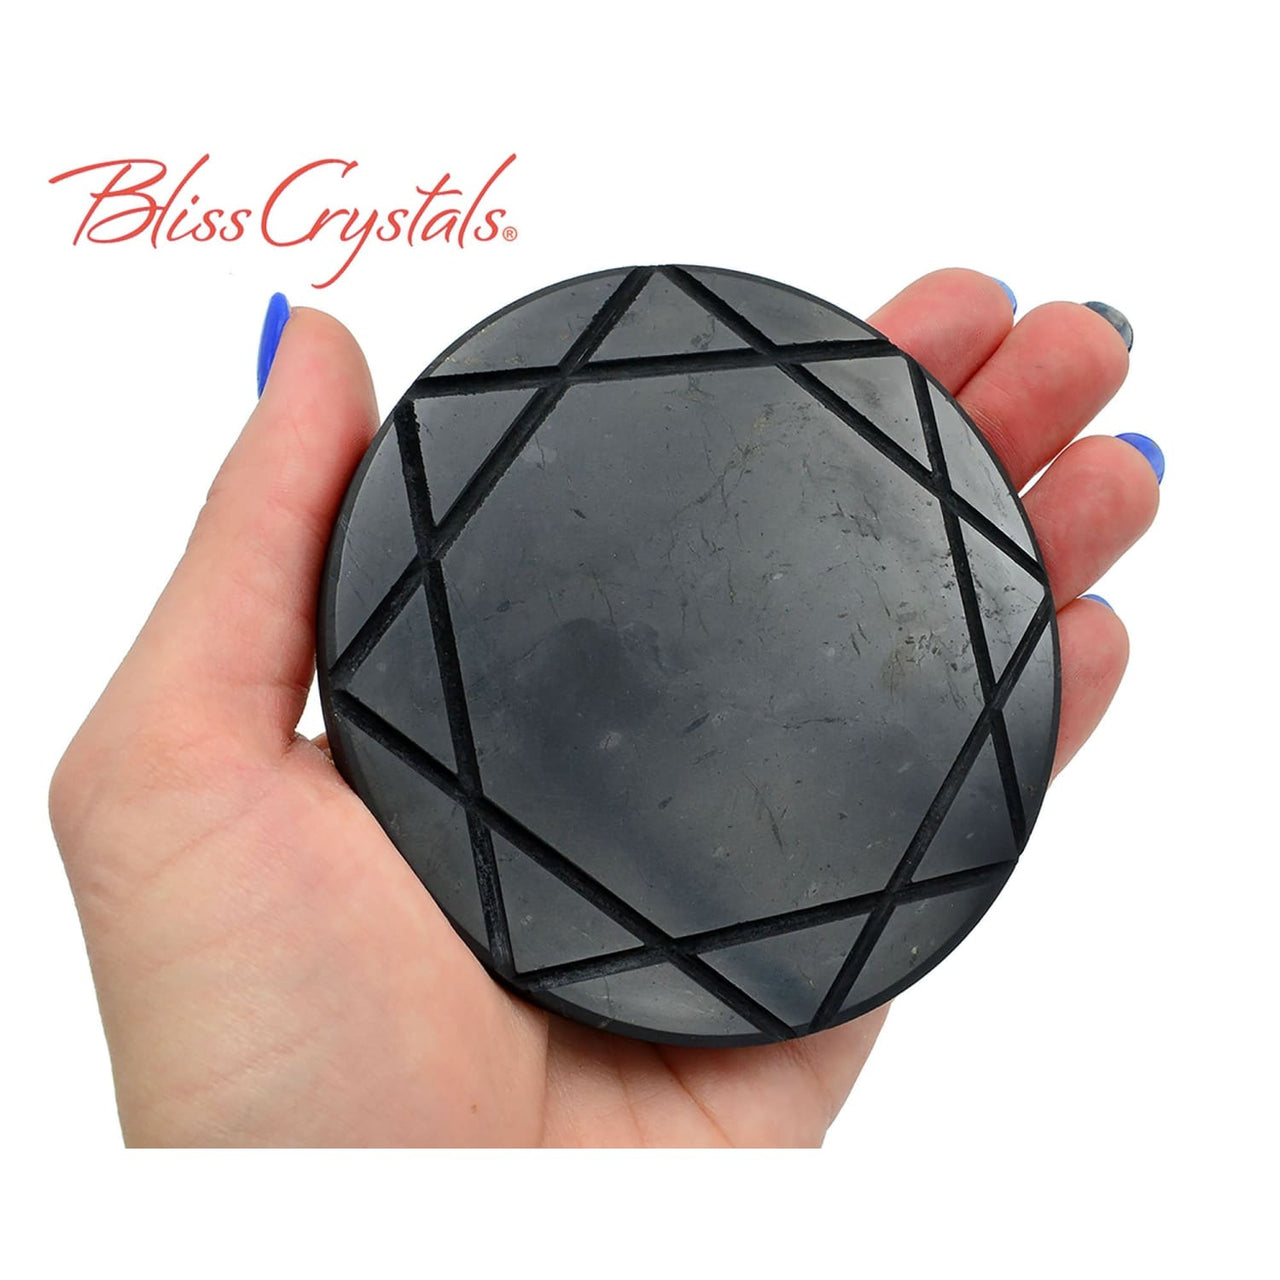 1 SHUNGITE Round Plate w/ 8 point Star Carving Polished 